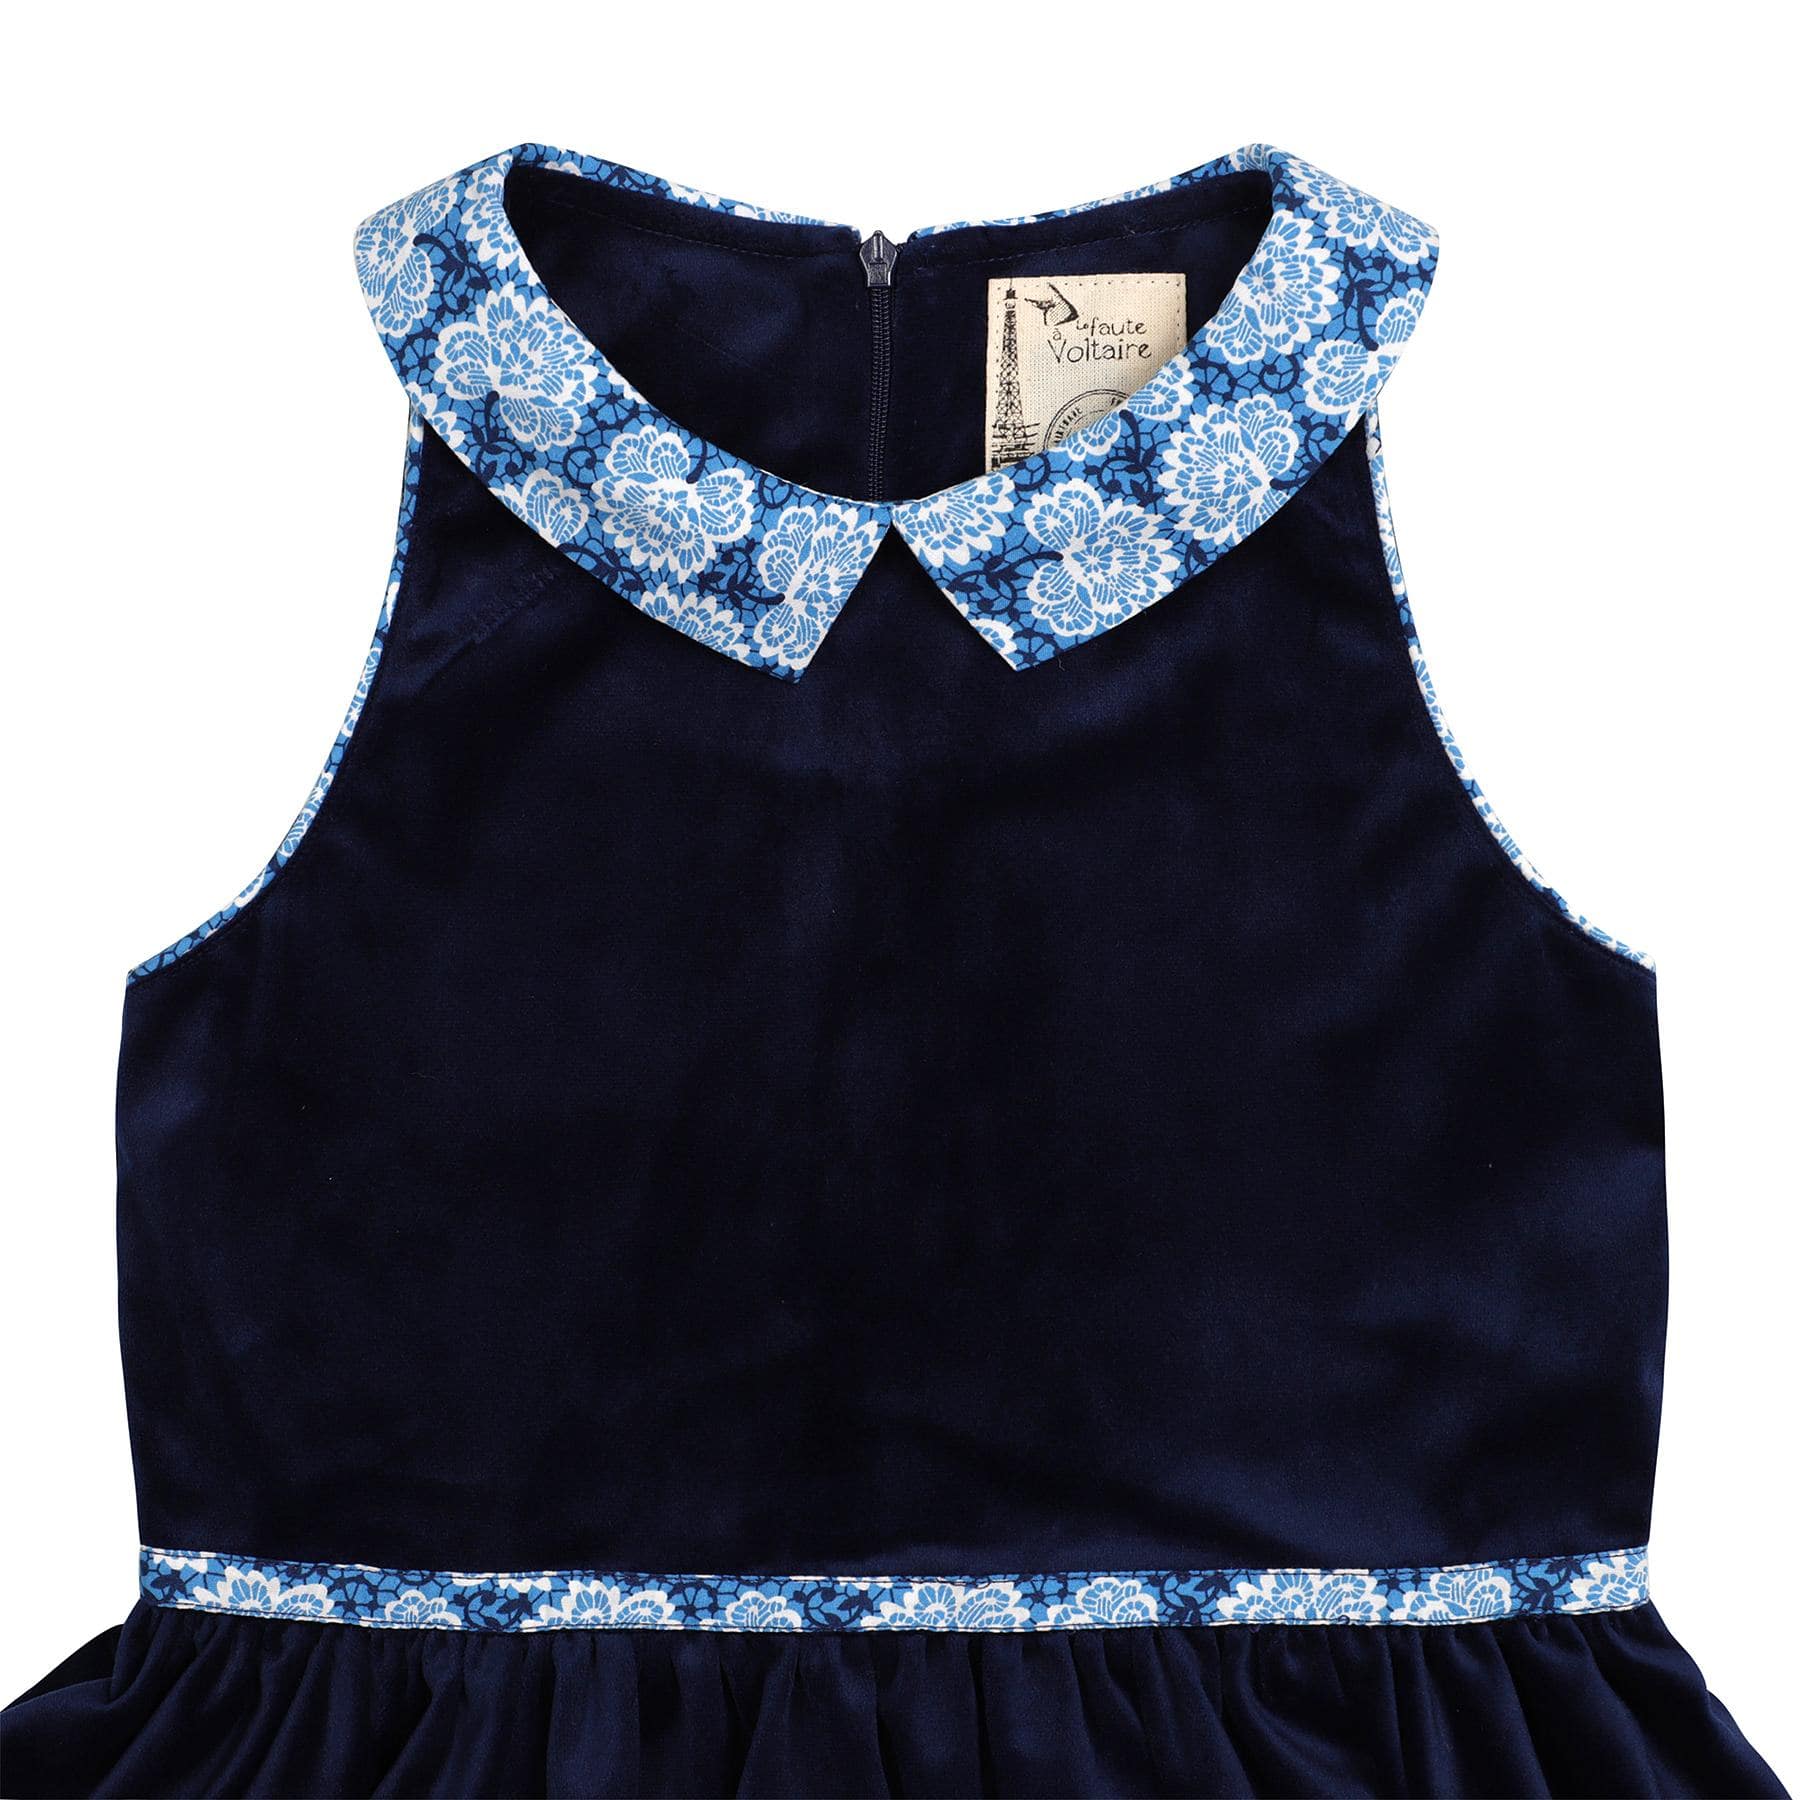 Girl's spinning dress in navy blue velvet and royal blue floral Claudine collar from the children's fashion brand LA FAUTE A VOLTAIRE